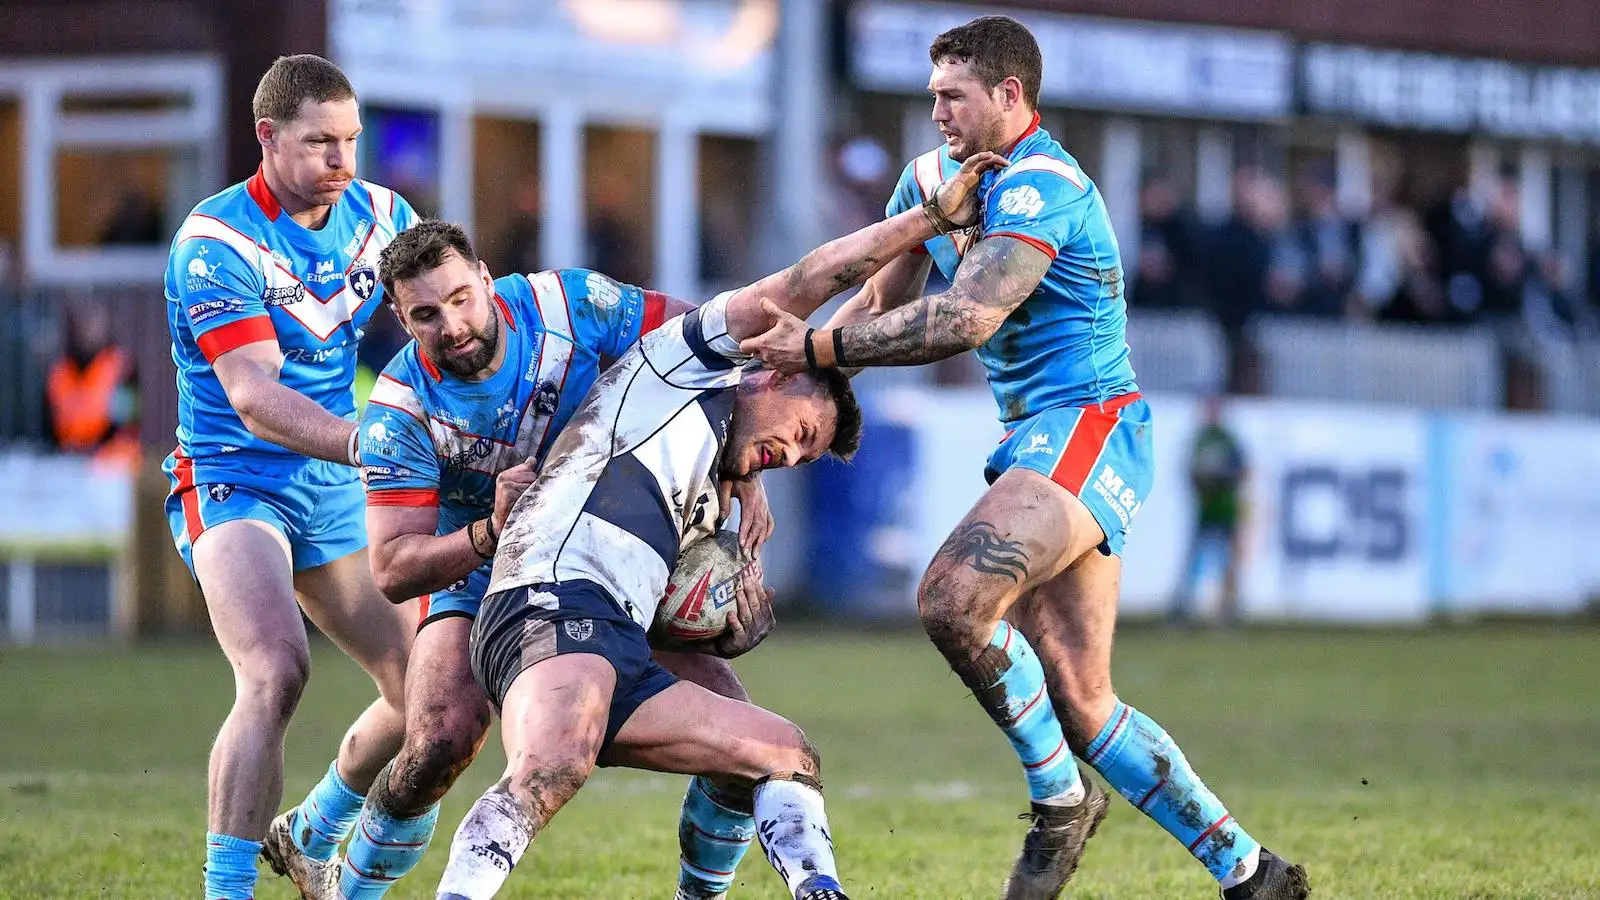 Featherstone Rovers forward to depart for ambitious League 1 club